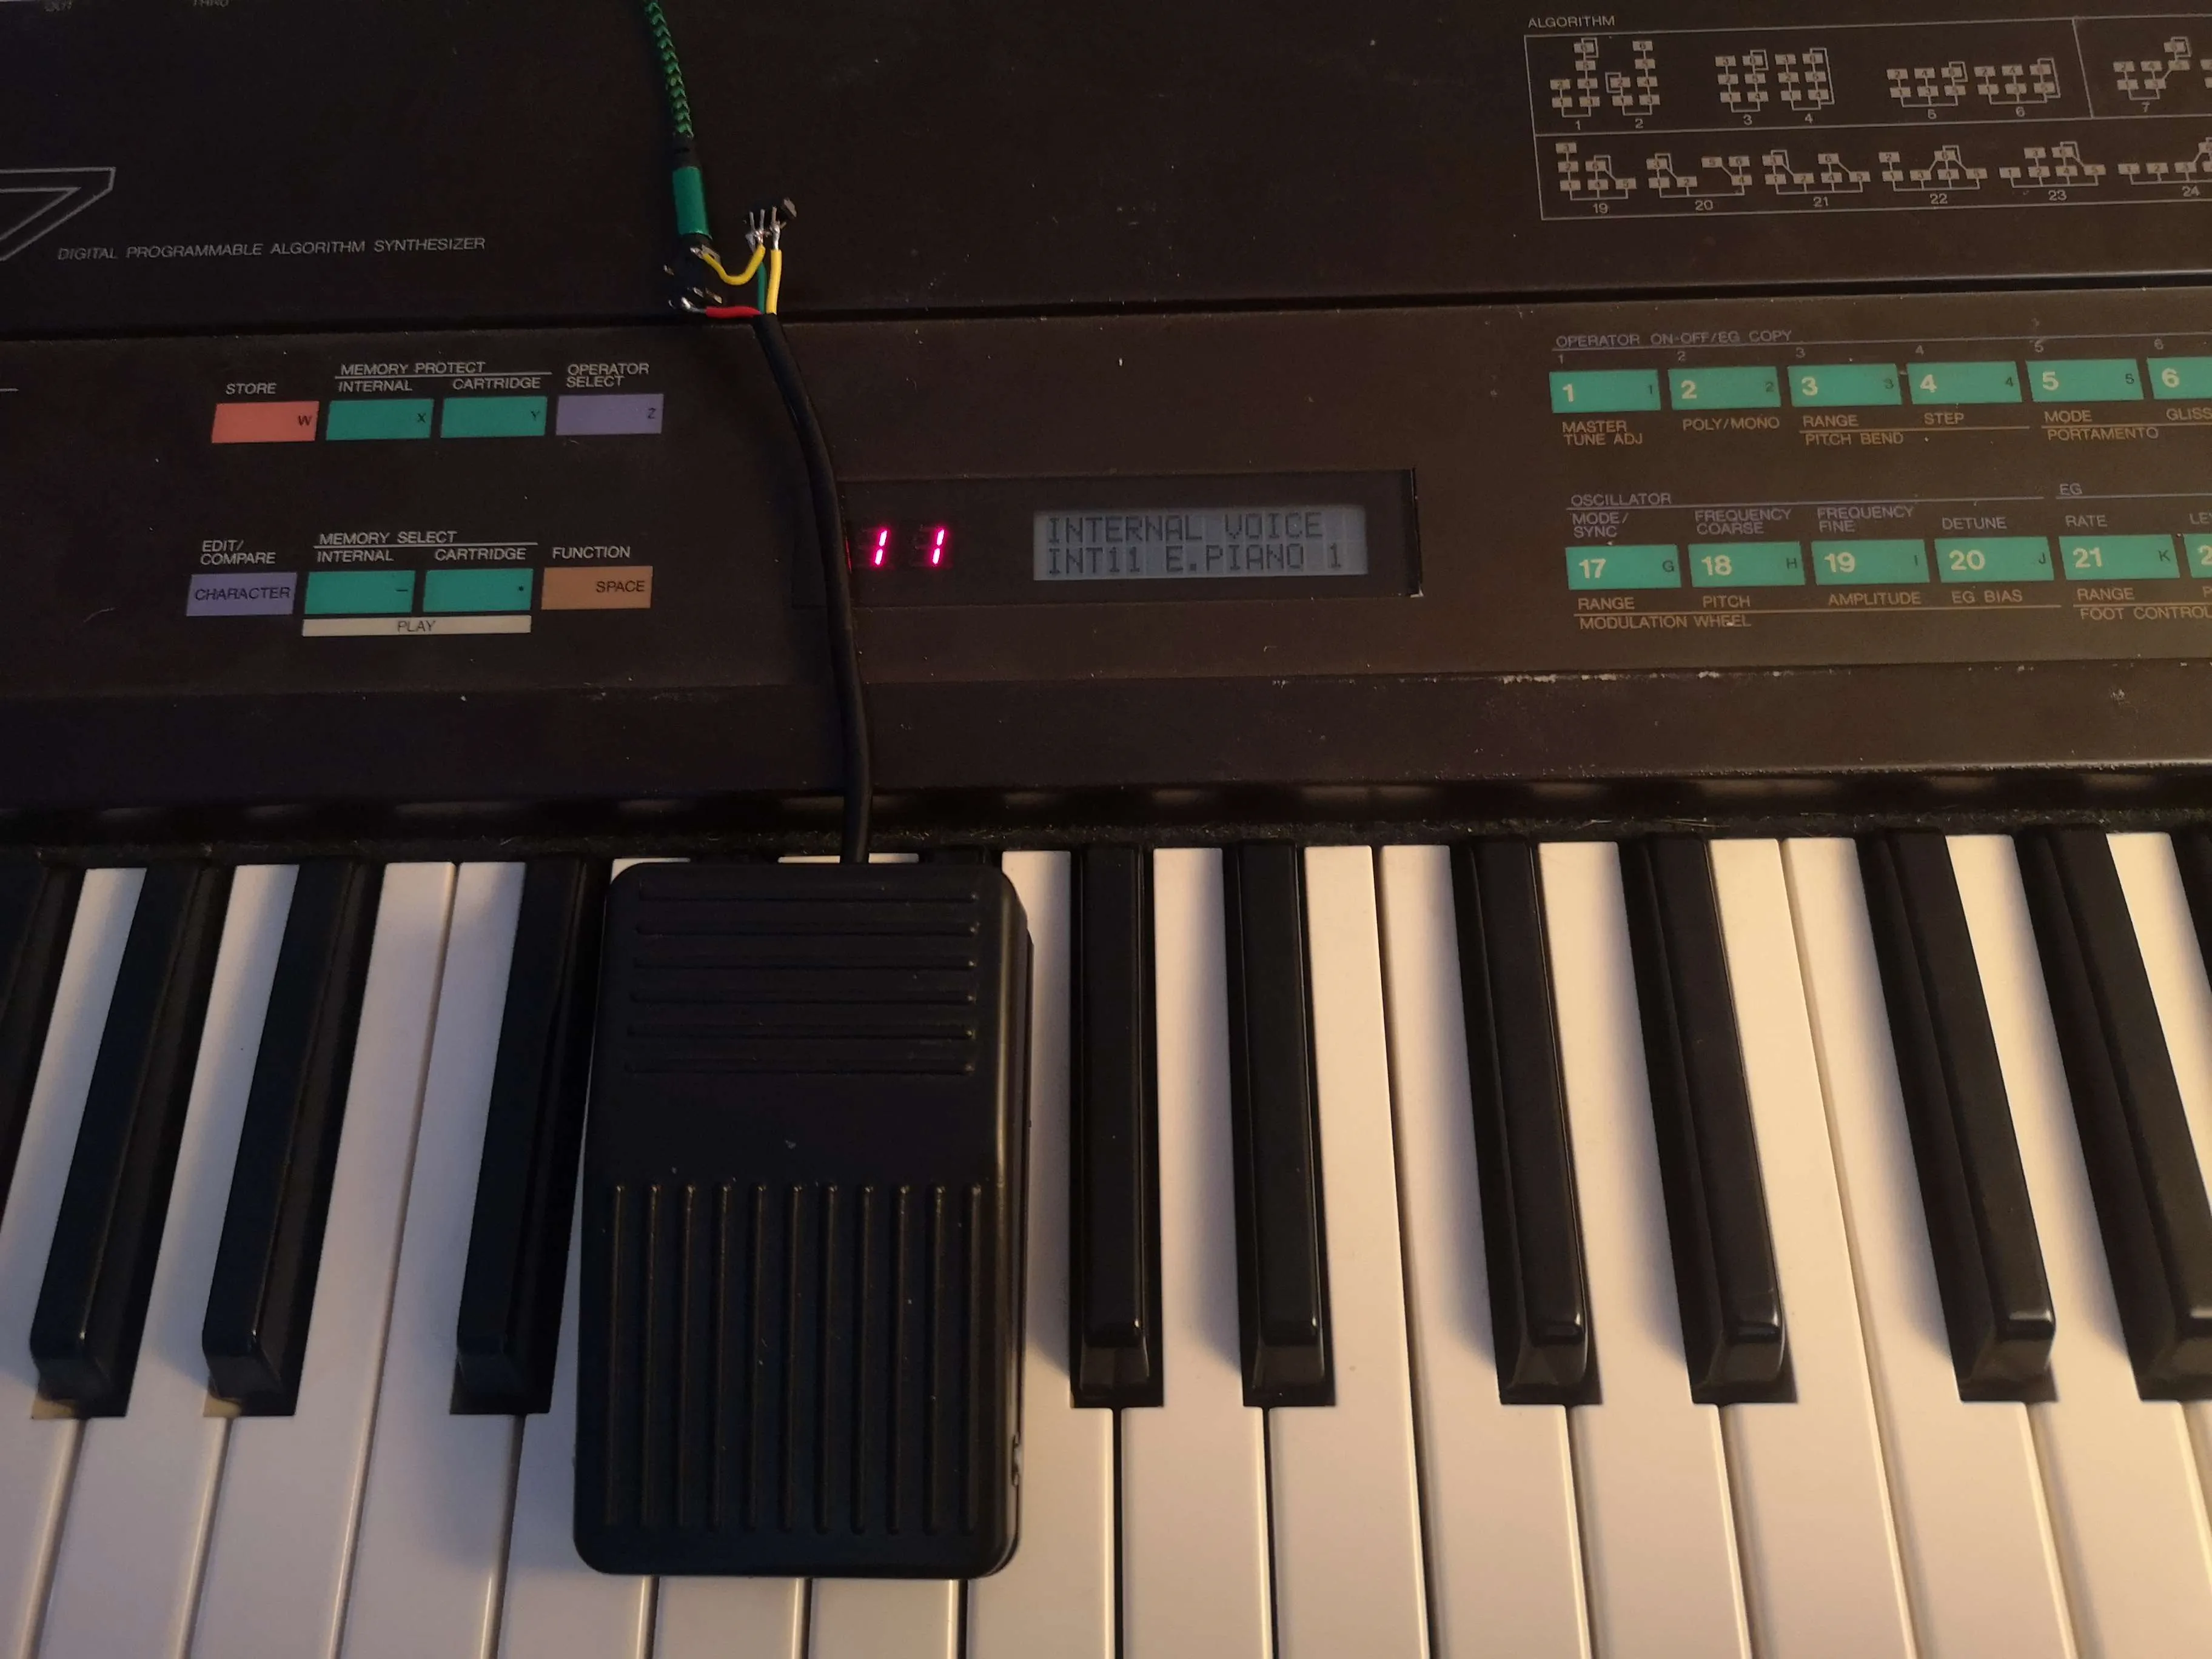 Image of the pedal and the DX7